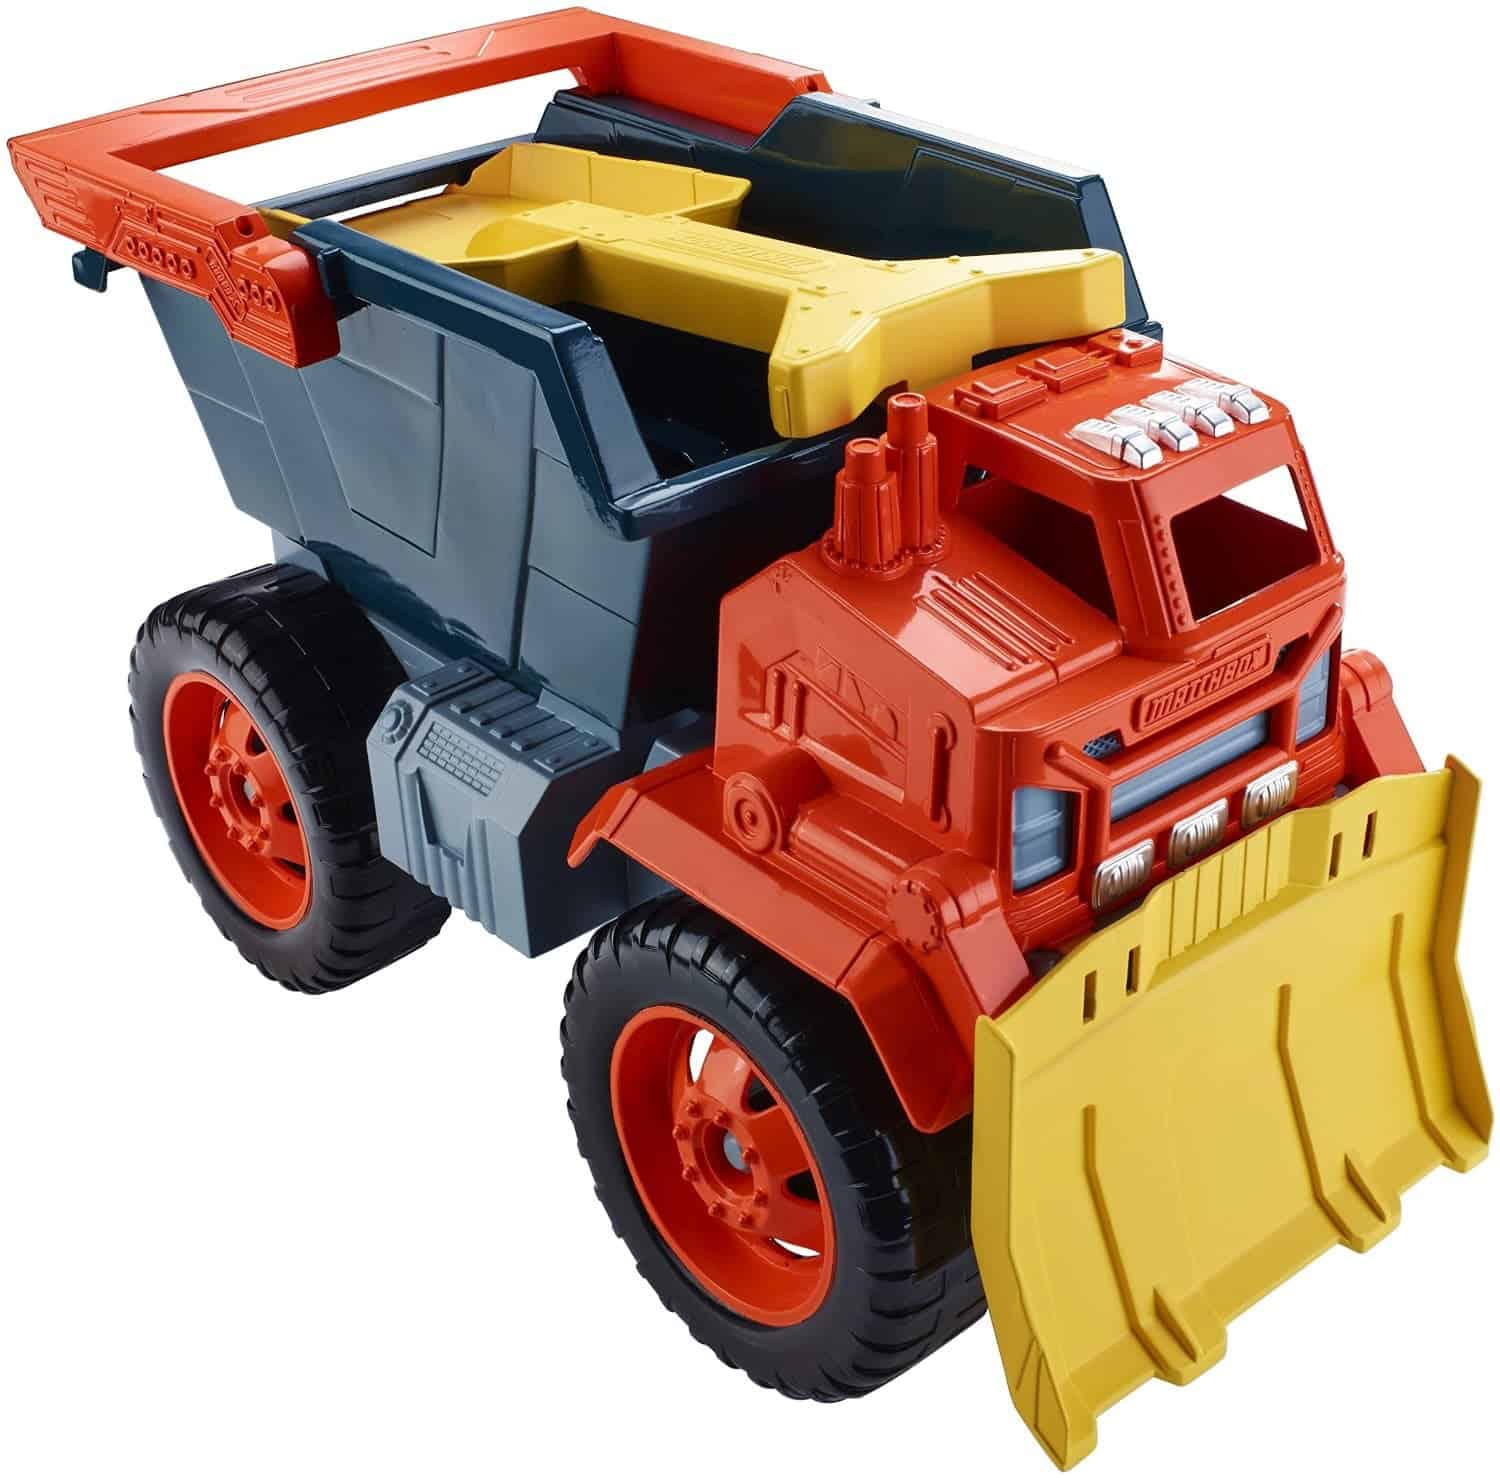 10+ Best Games and Toys for a Fun Day at the Beach: Sand Truck| www.thepinningmama.com